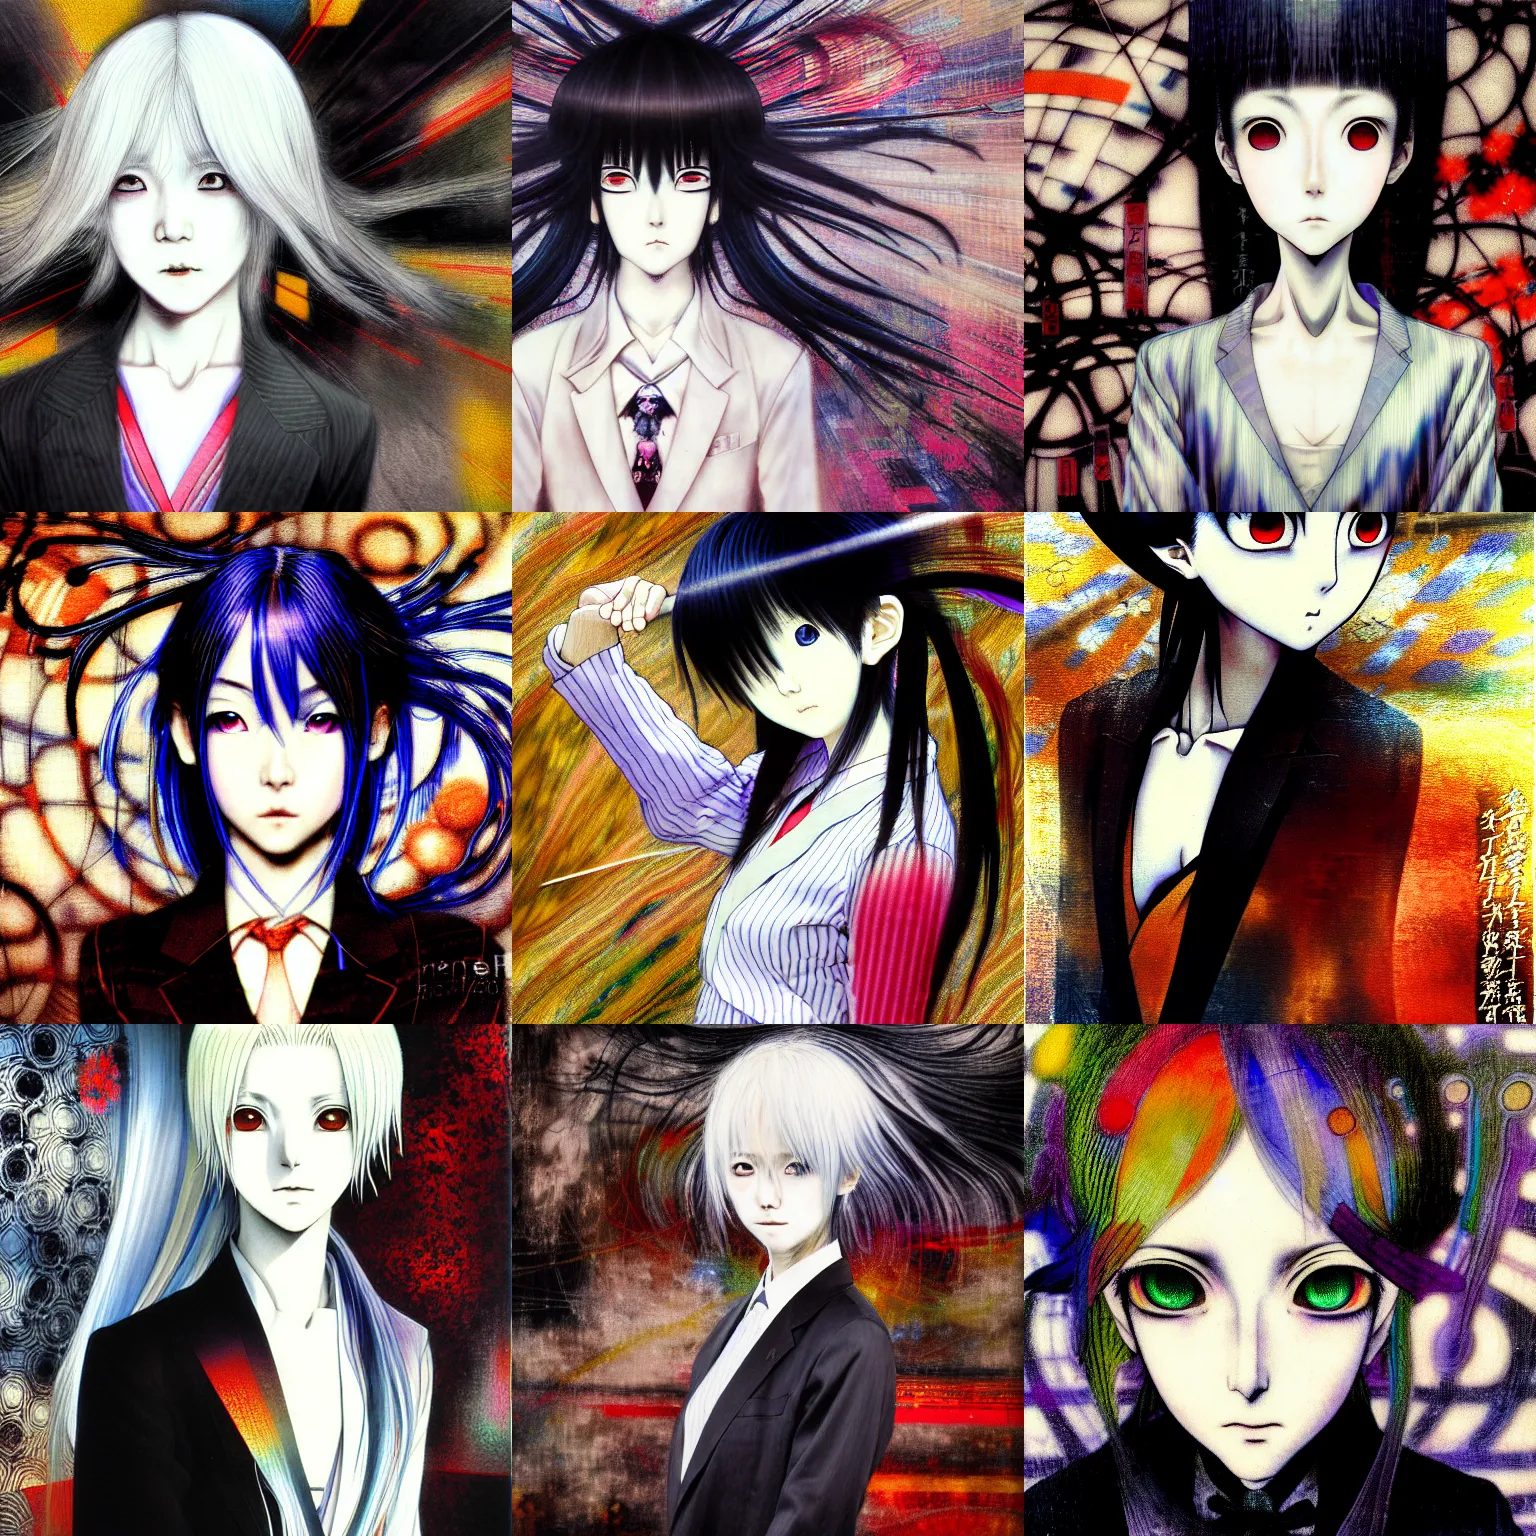 Prompt: yoshitaka amano blurred and dreamy realistic three quarter angle portrait of an anime girl with white hair and black eyes wearing dress suit with tie, junji ito abstract patterns in the background, satoshi kon anime, noisy film grain effect, highly detailed, renaissance oil painting, weird portrait angle, blurred lost edges